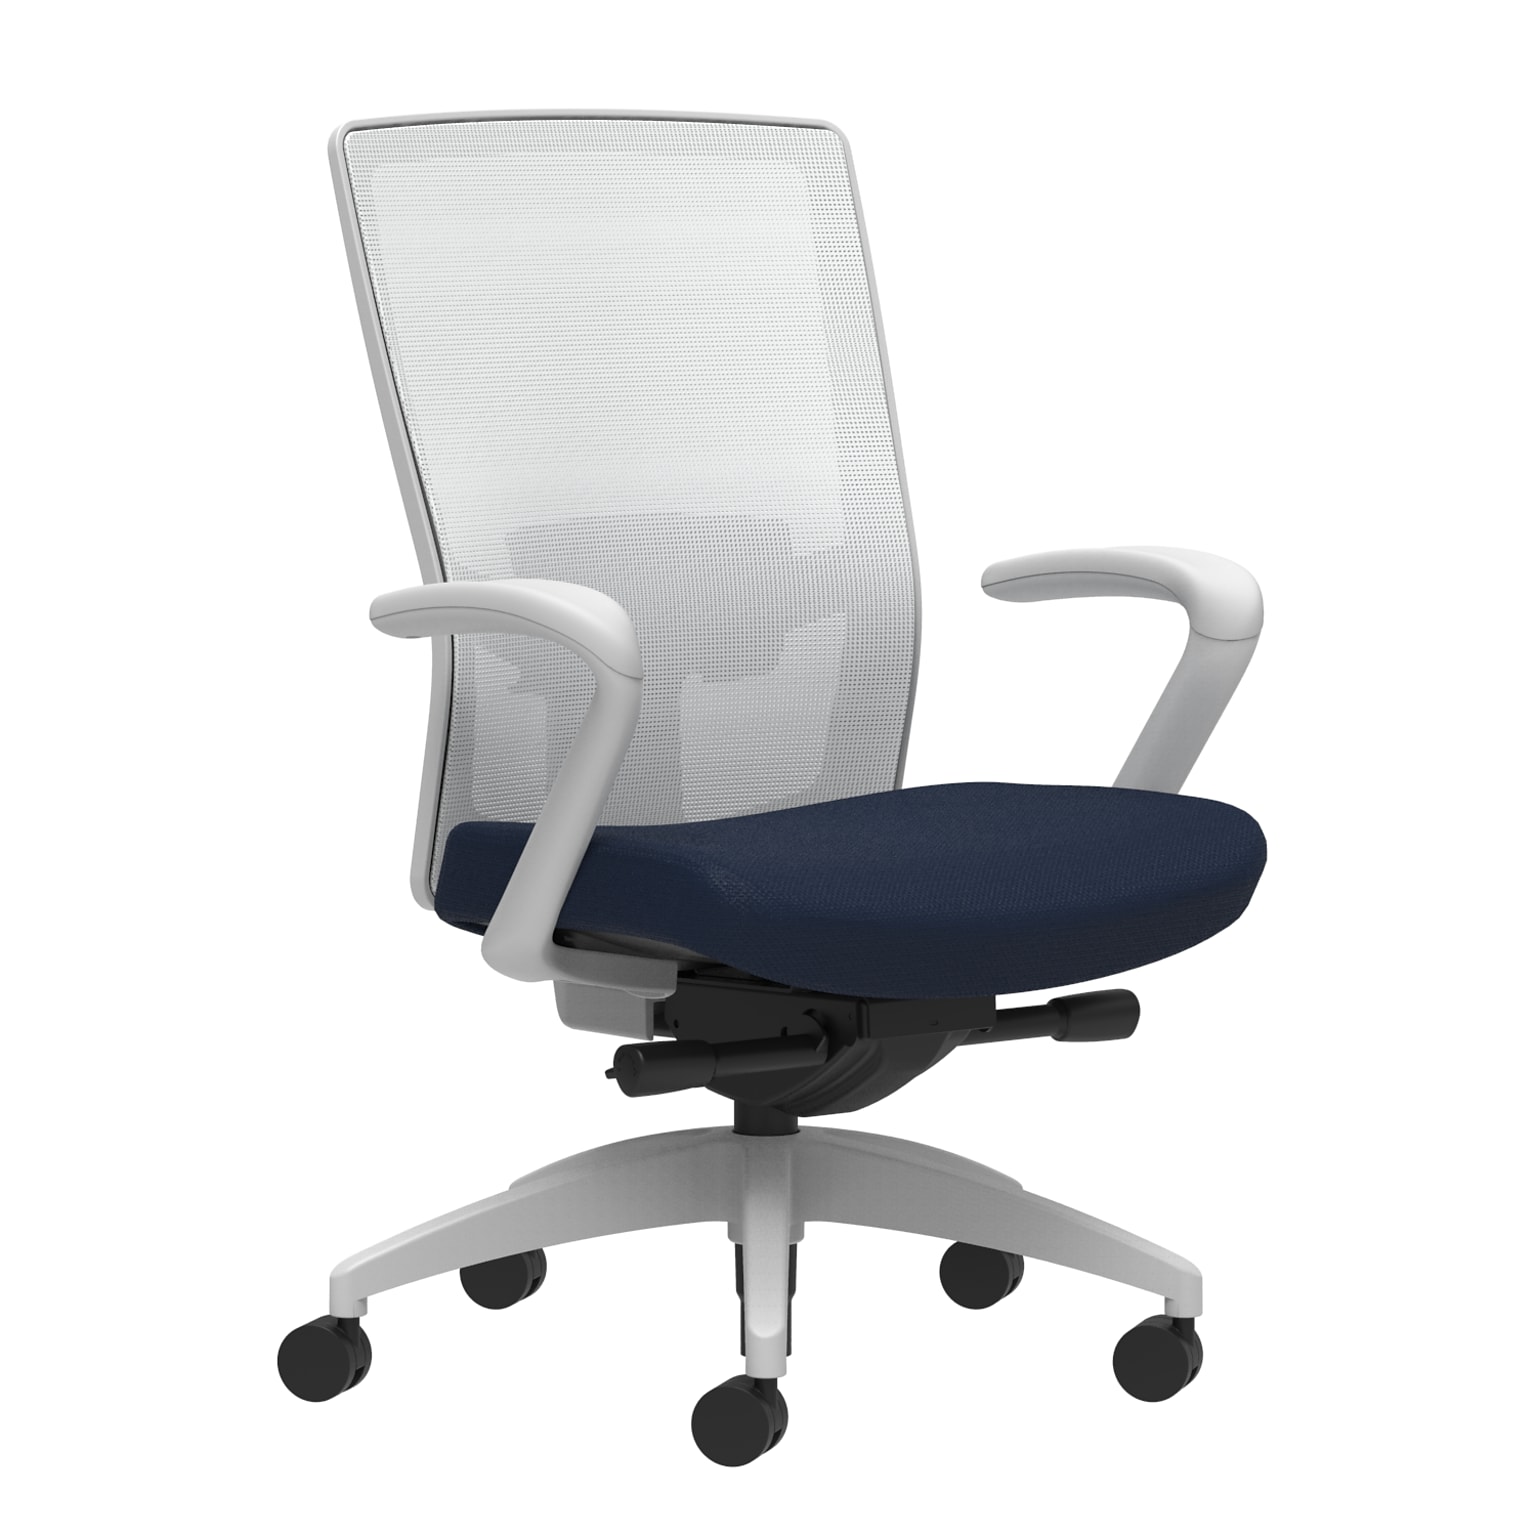 Union & Scale Workplace2.0™ Fabric Task Chair, Navy, Adjustable Lumbar, Fixed Arms, Advanced Synchro-Tilt Seat Control (53595)